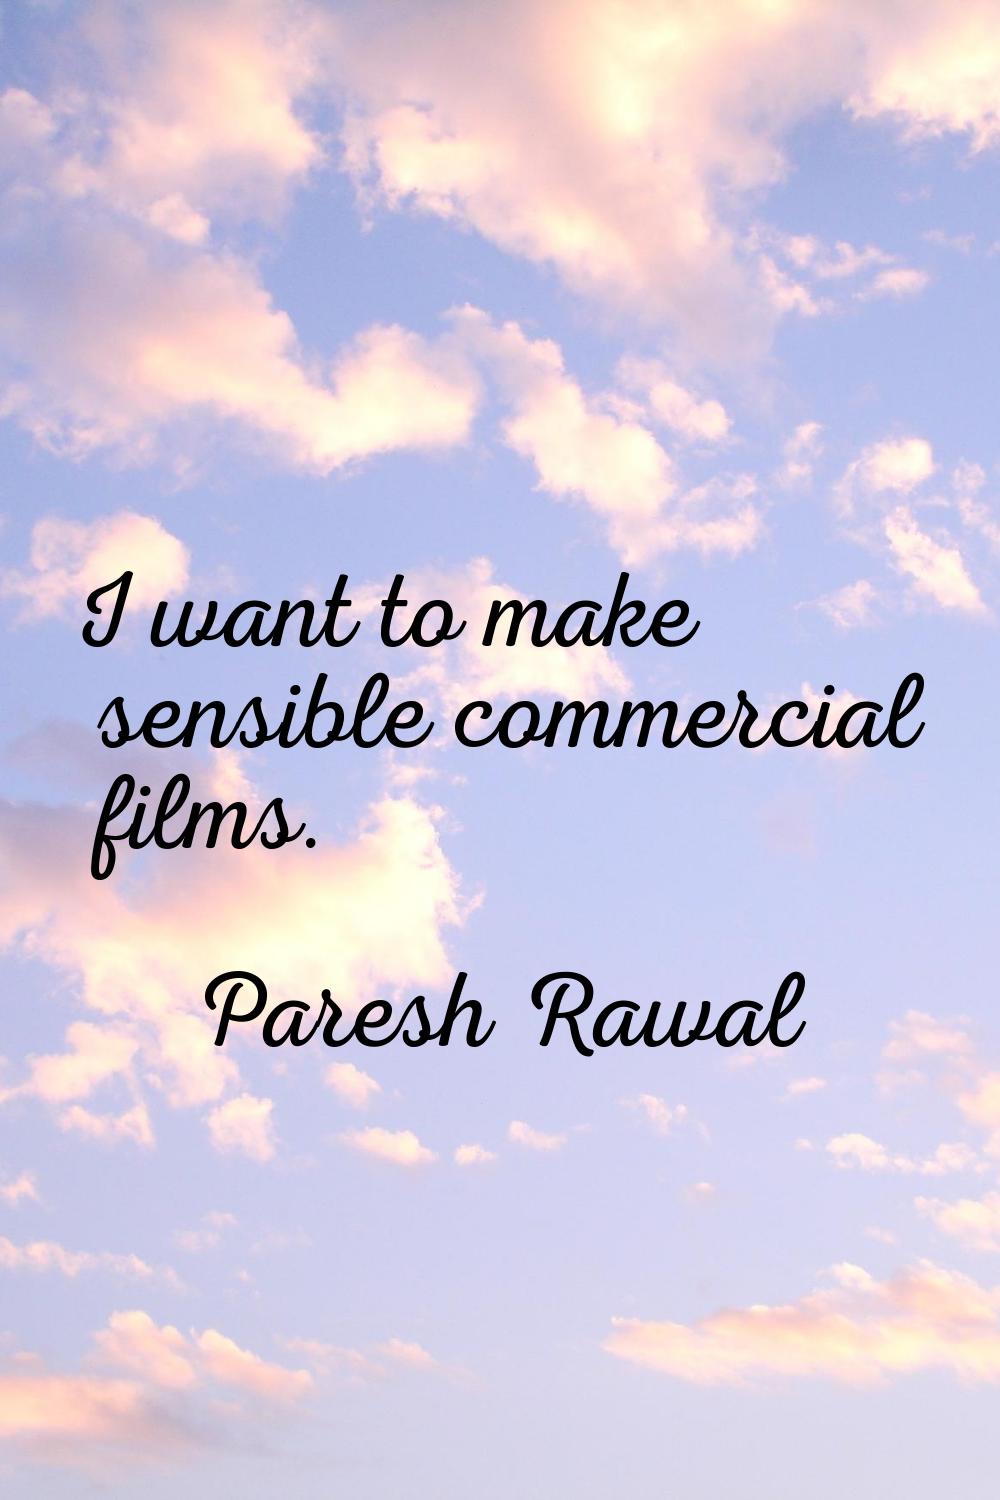 I want to make sensible commercial films.